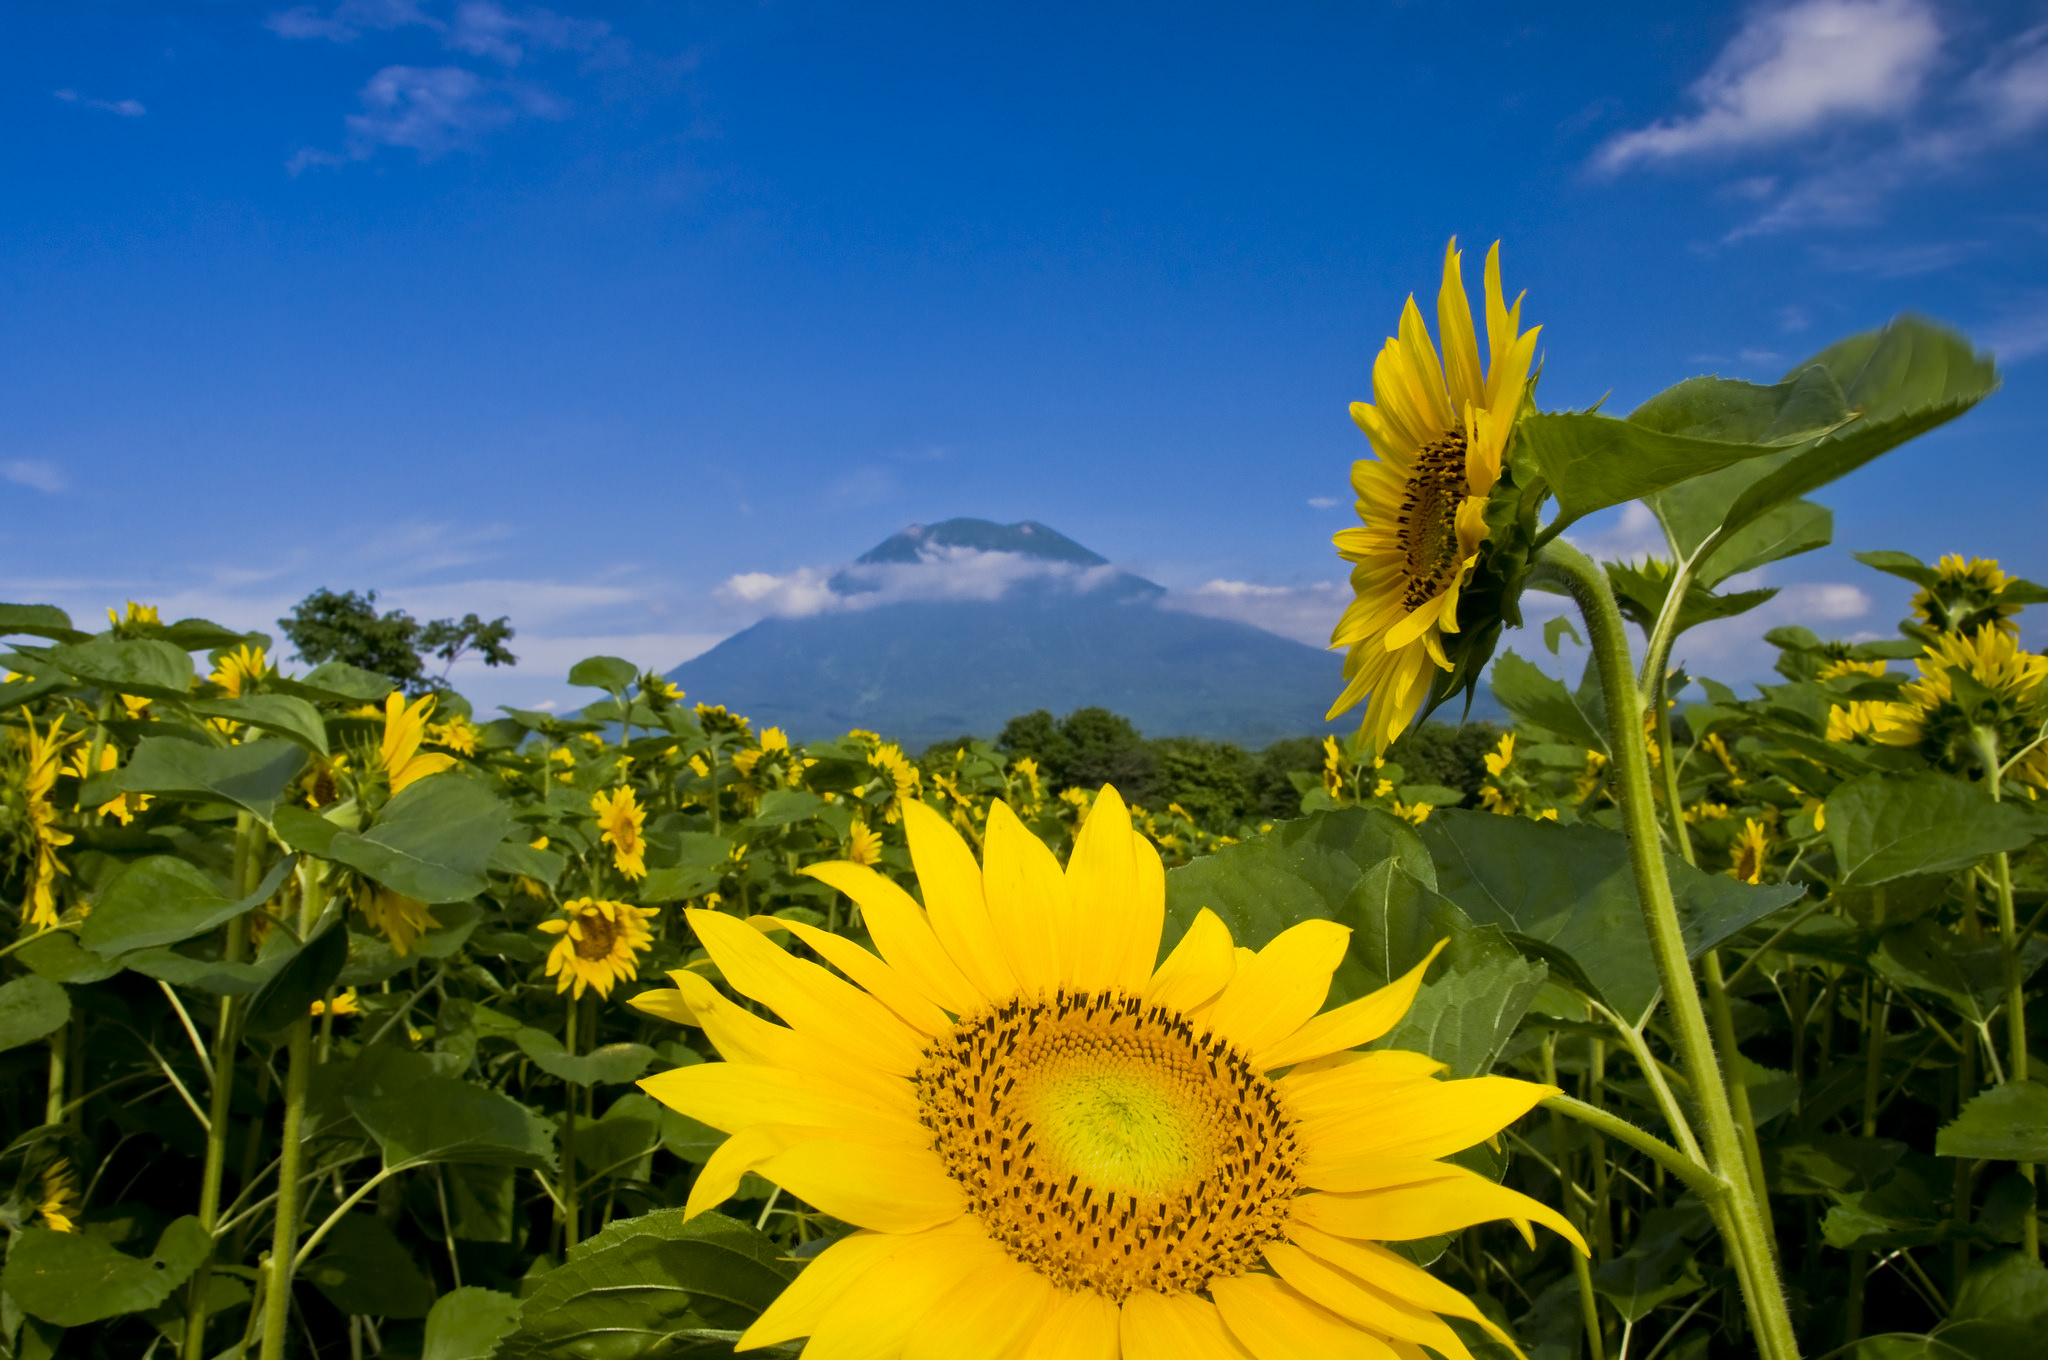 Sunflowers sit at the base of Yotei on a beautiful summer day